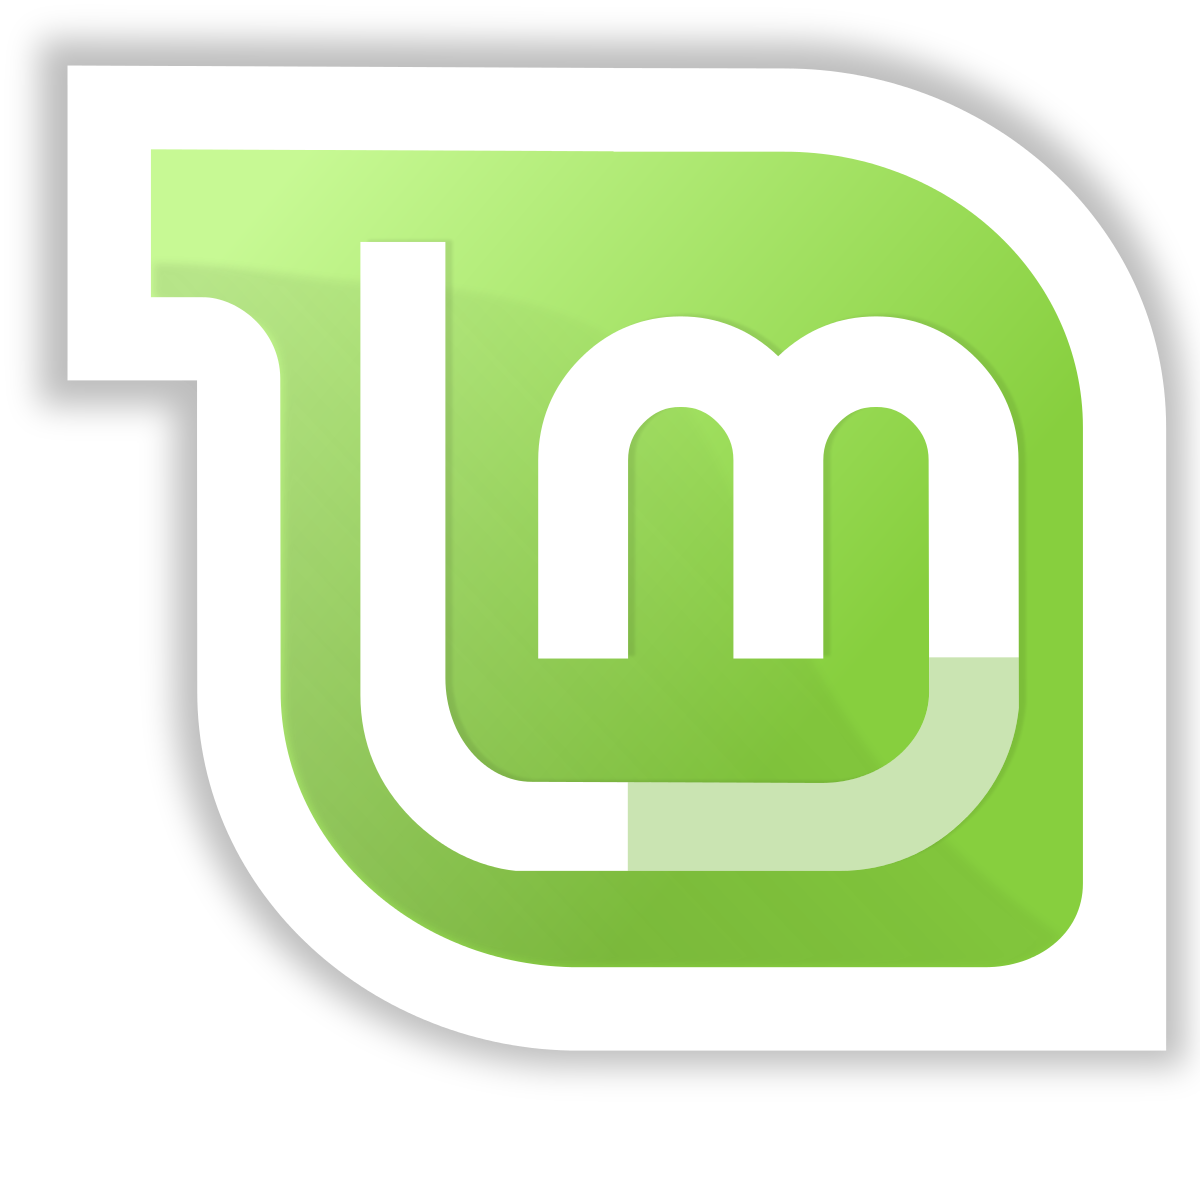 how to install linux mint